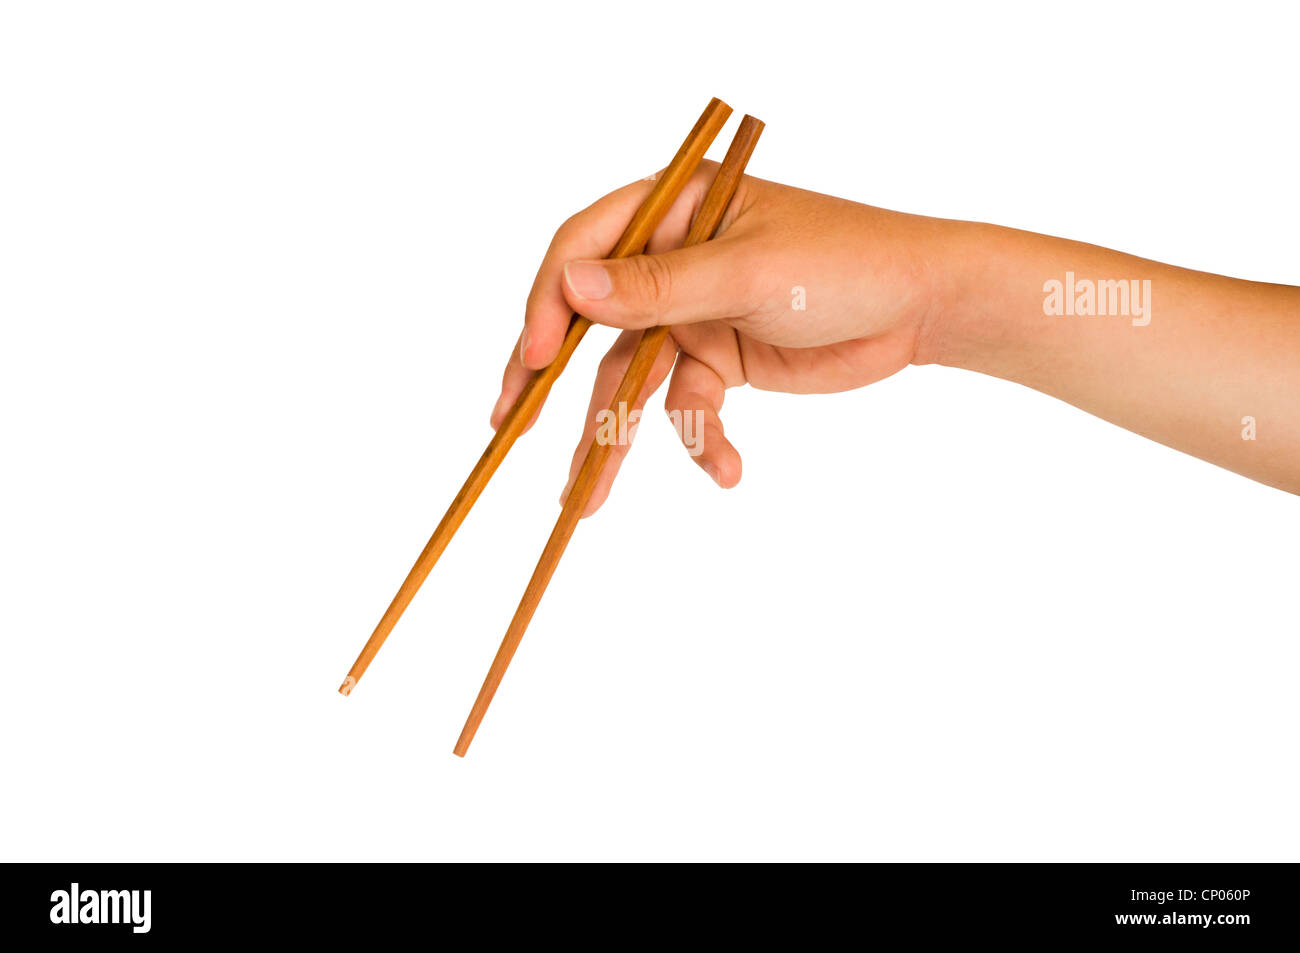 isolated man hand holding wooden chopstick, with clipping path in jpg. Stock Photo